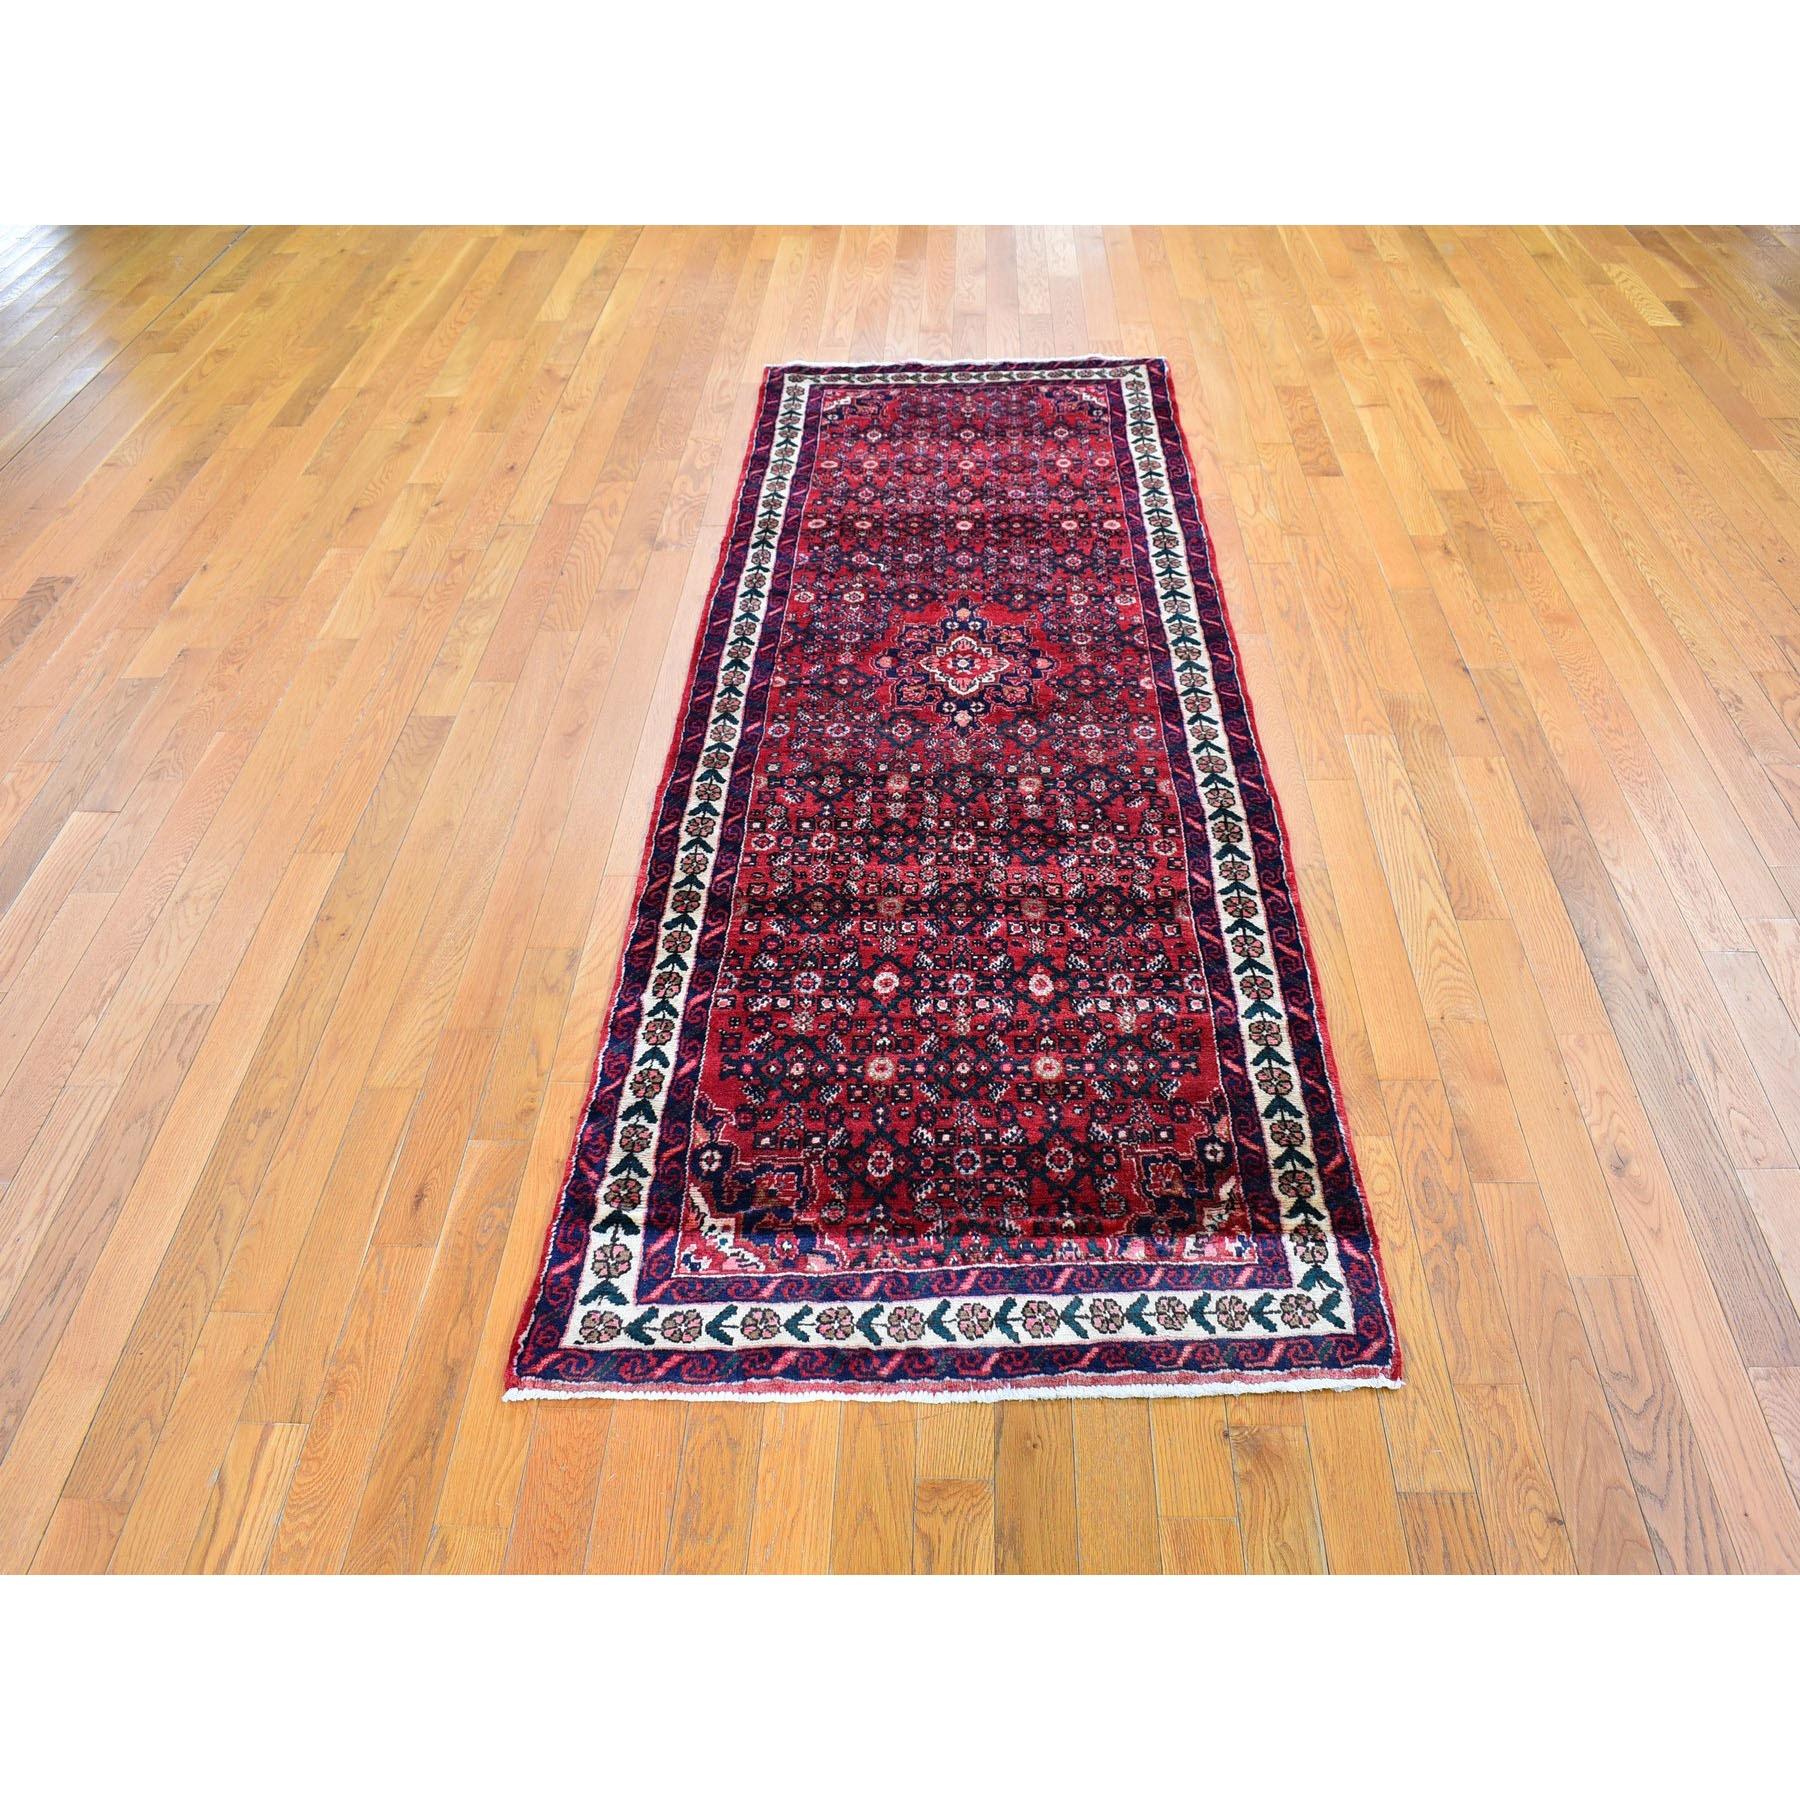 This fabulous hand-knotted carpet has been created and designed for extra strength and durability. This rug has been handcrafted for weeks in the traditional method that is used to make
Exact Rug Size in Feet and Inches : 3'2